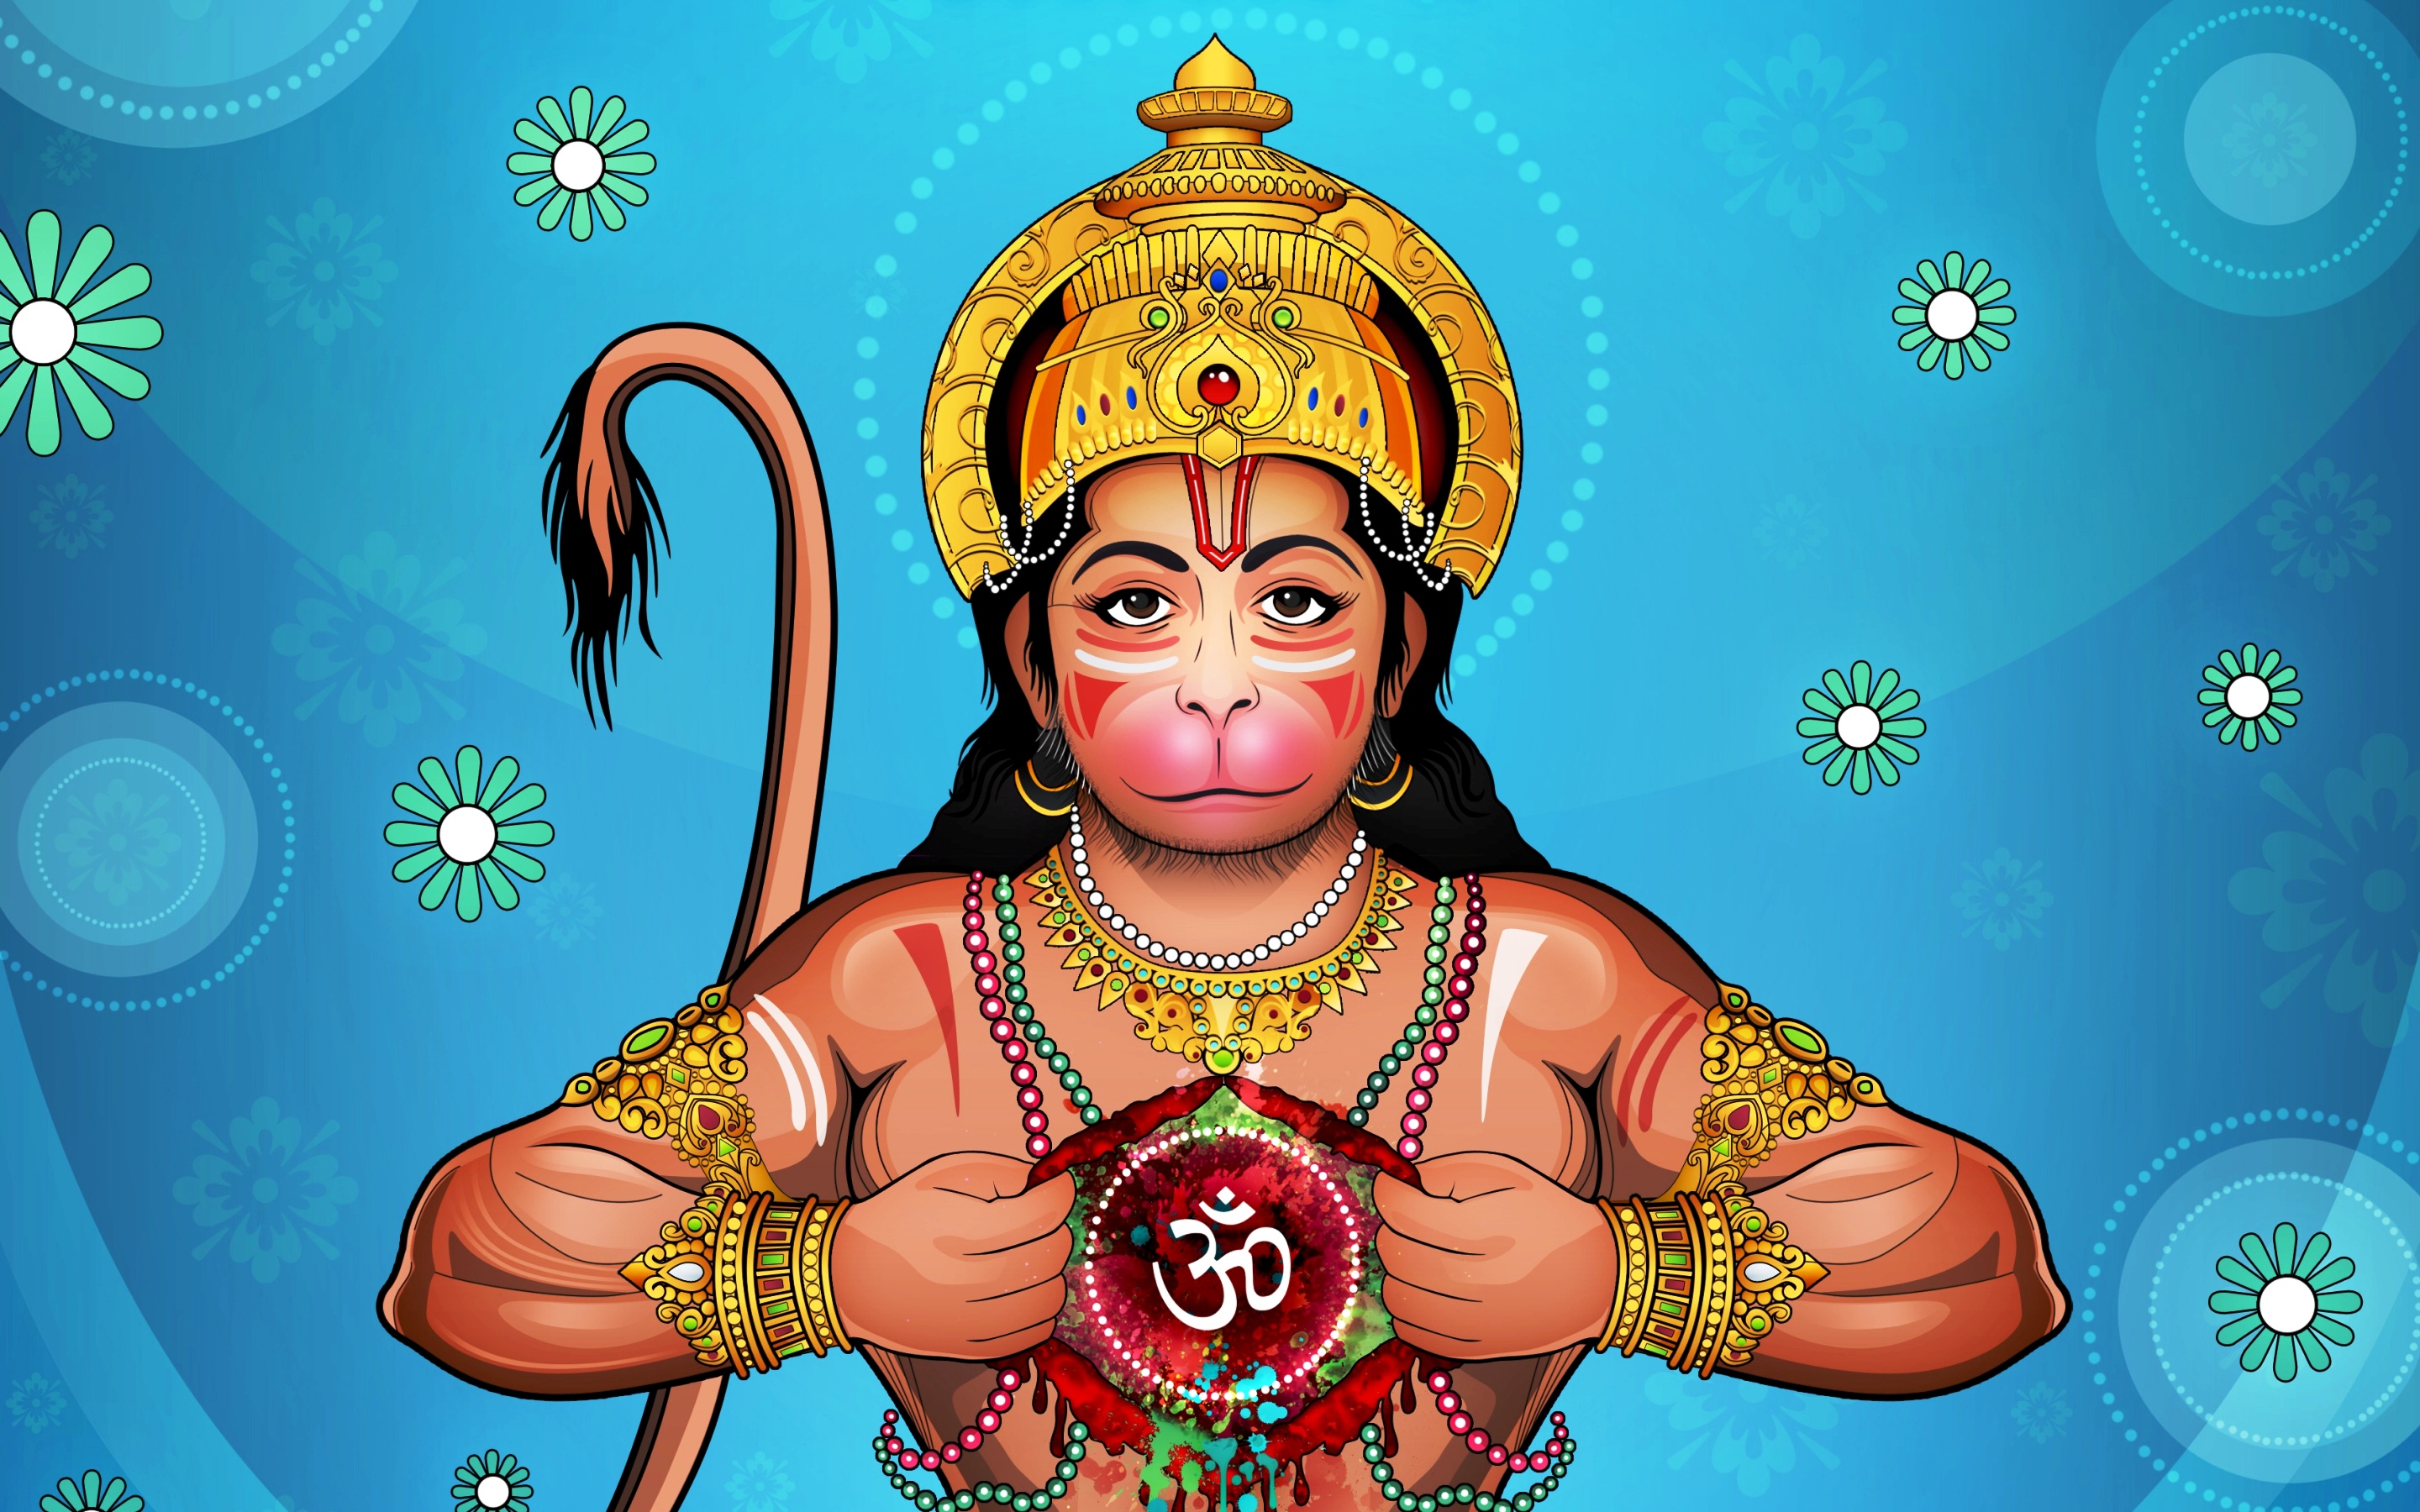 Hanuman Ji  bajrangbali HD poster for Wall Decor WxH 19x13 Photographic  Paper  Religious posters in India  Buy art film design movie music  nature and educational paintingswallpapers at Flipkartcom